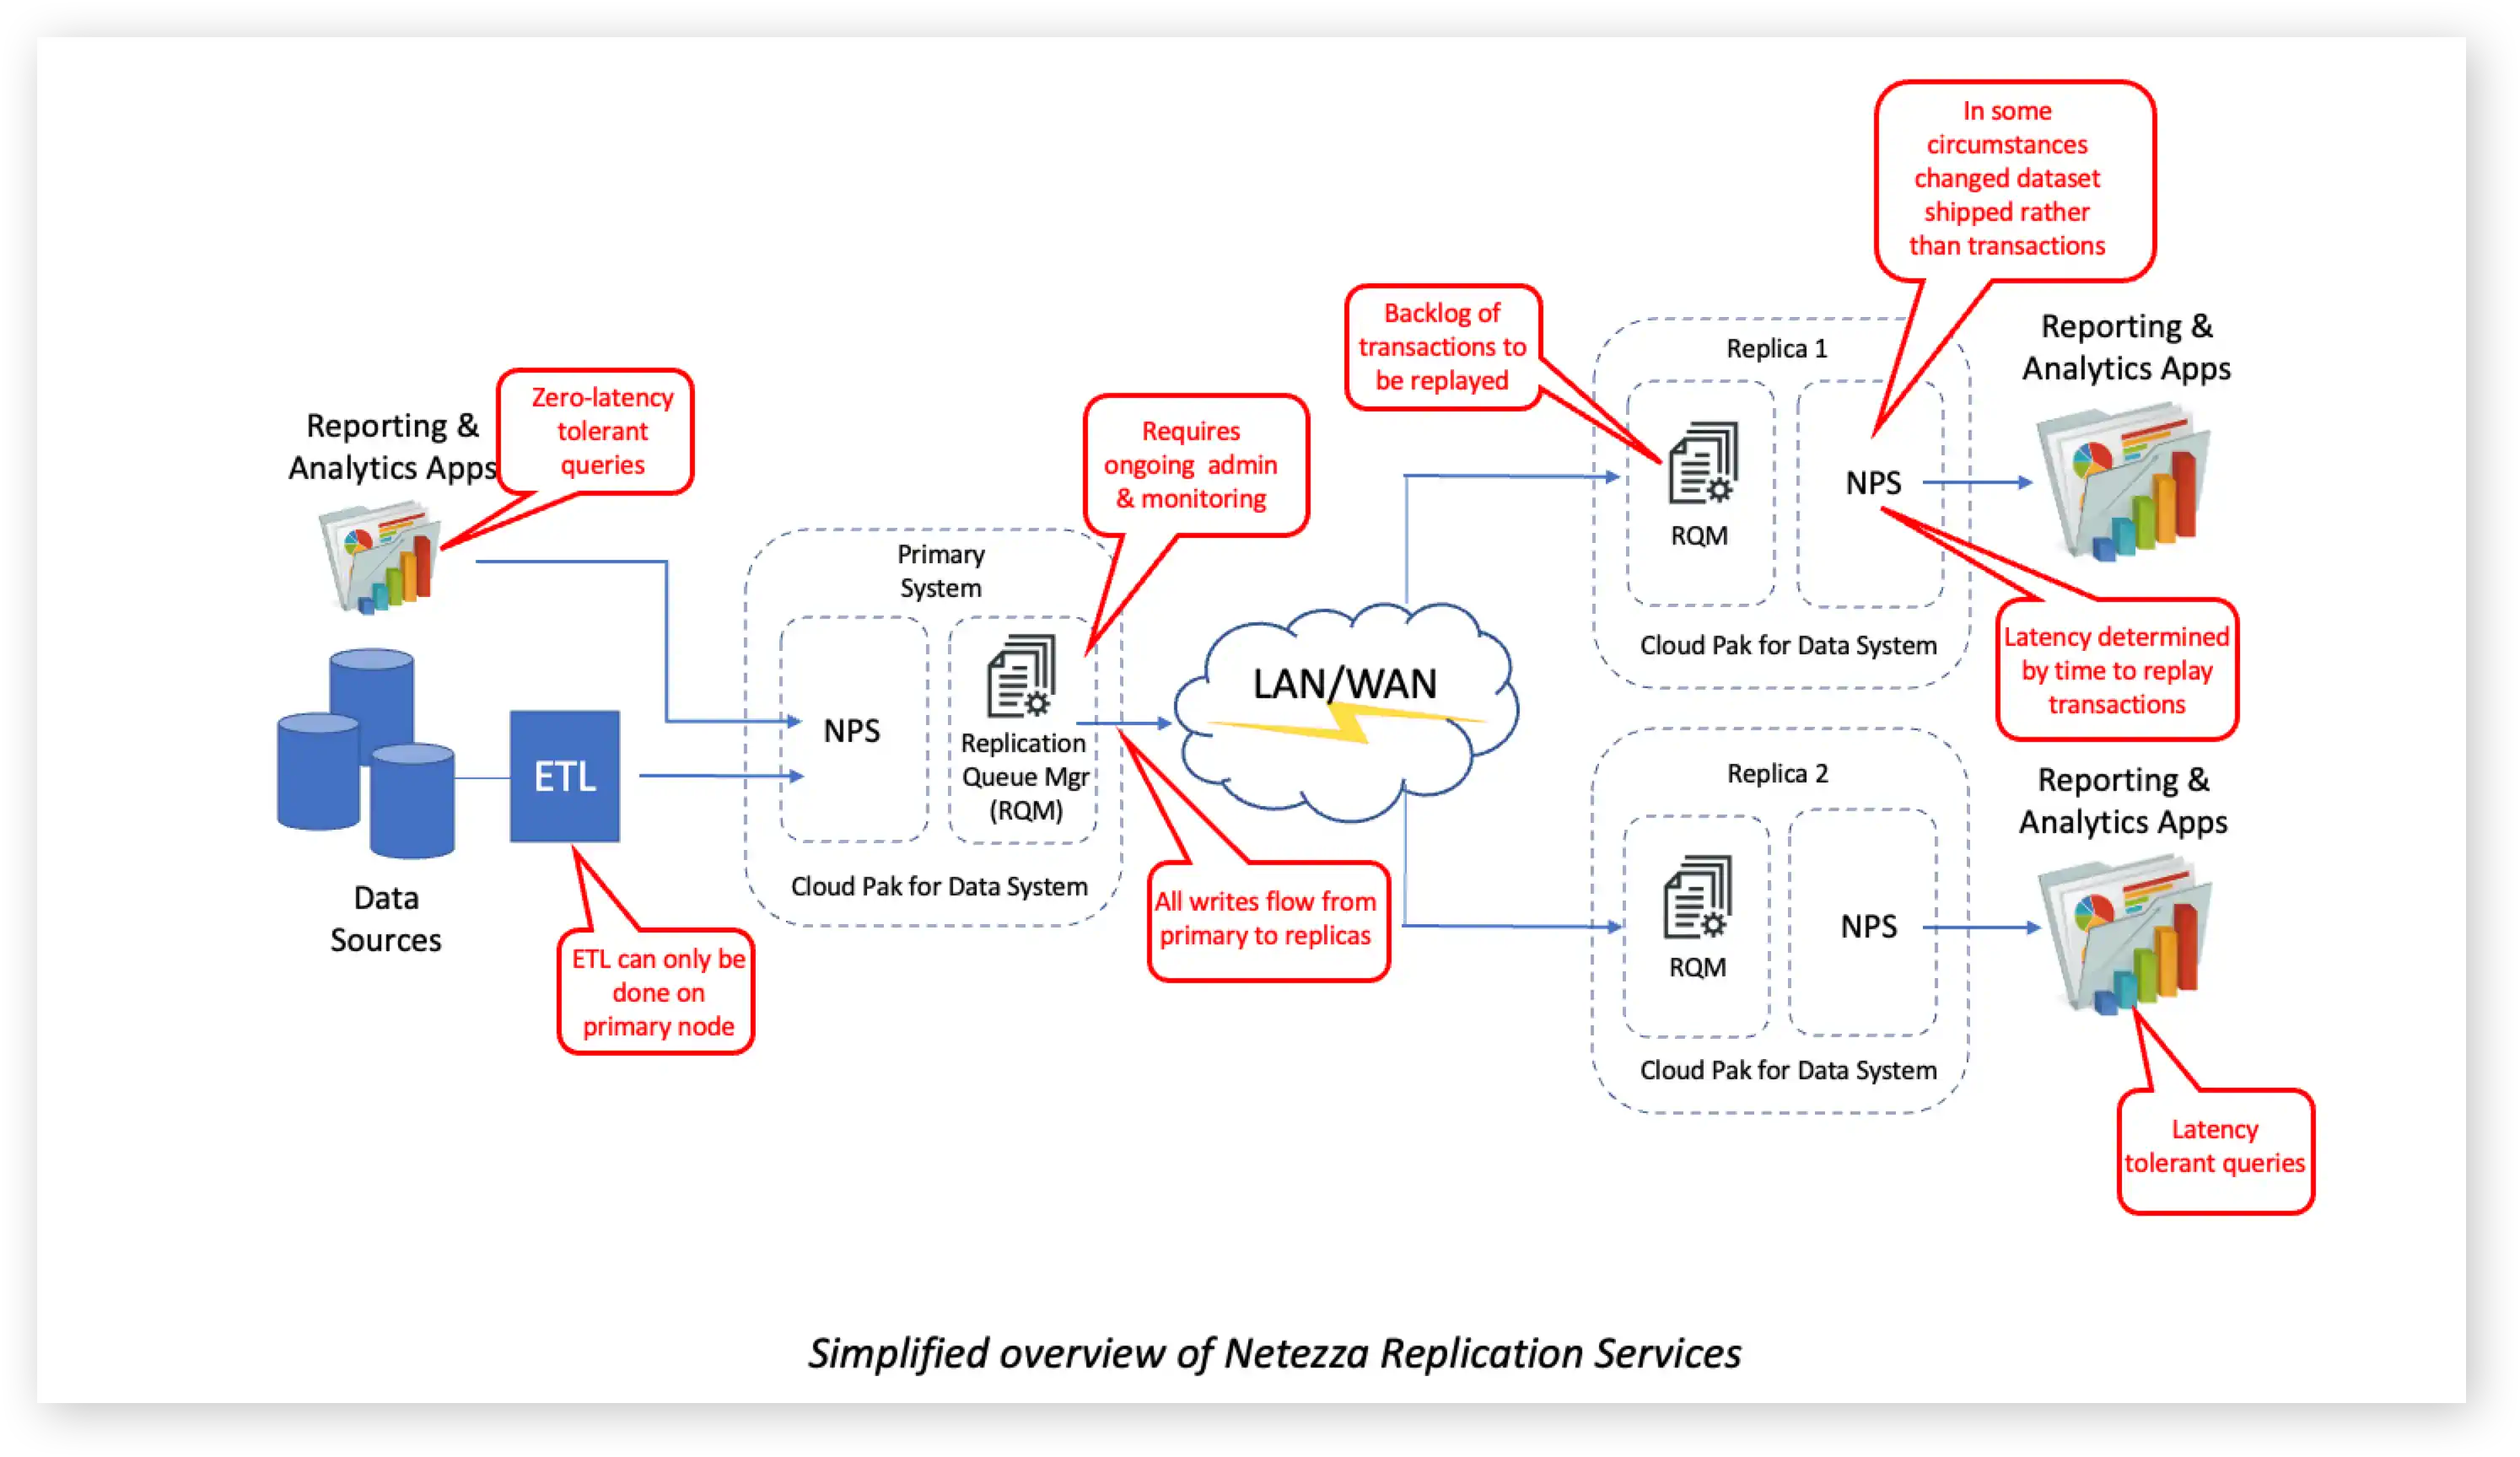 Simplied Overview of Netezza Replication Services